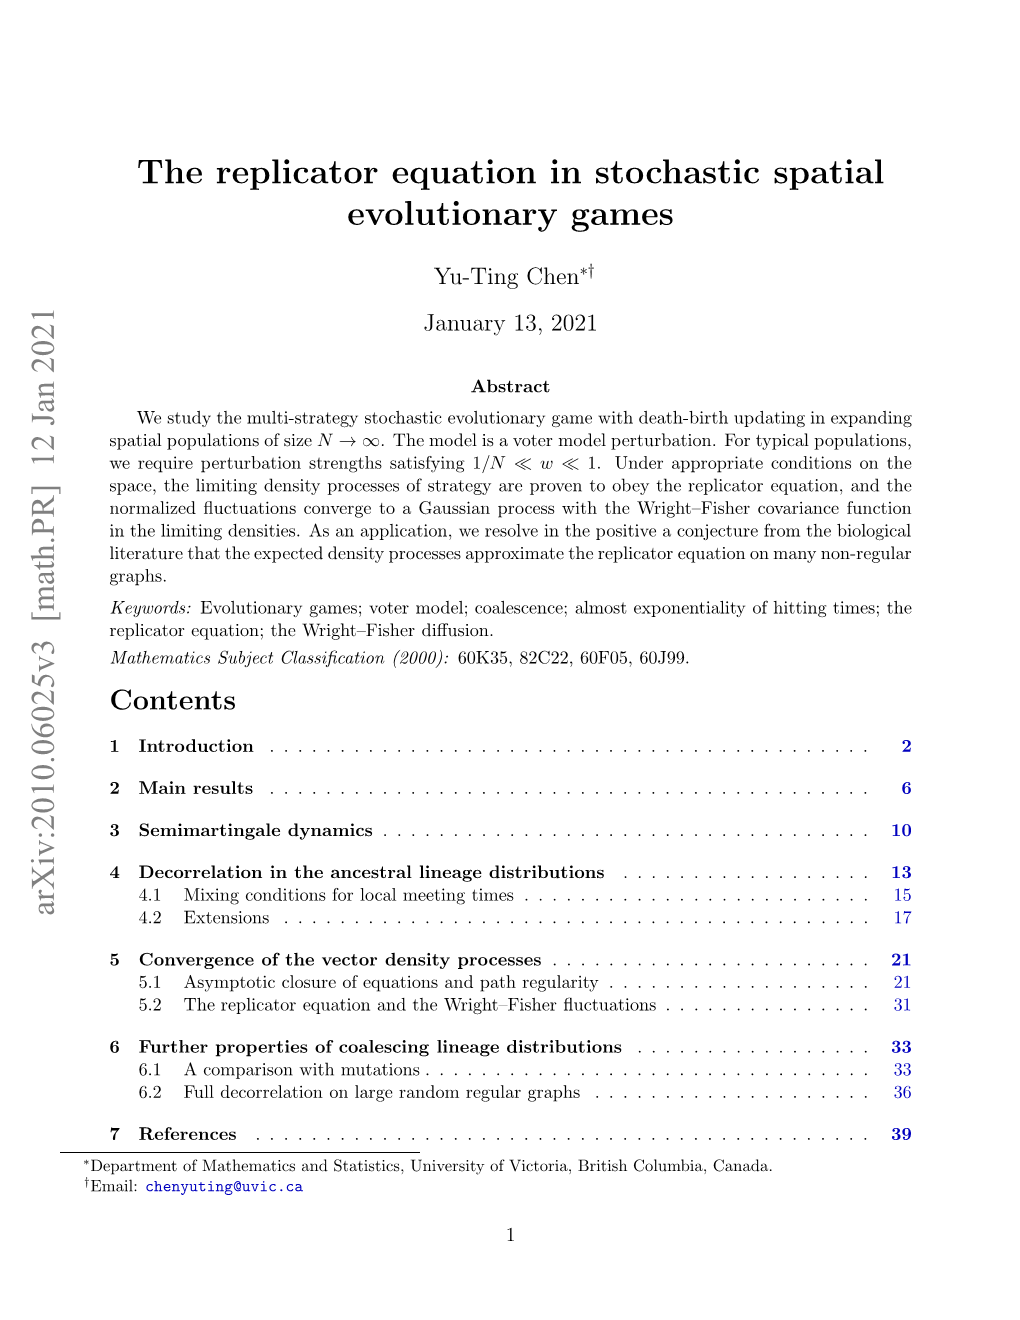 The Replicator Equation in Stochastic Spatial Evolutionary Games